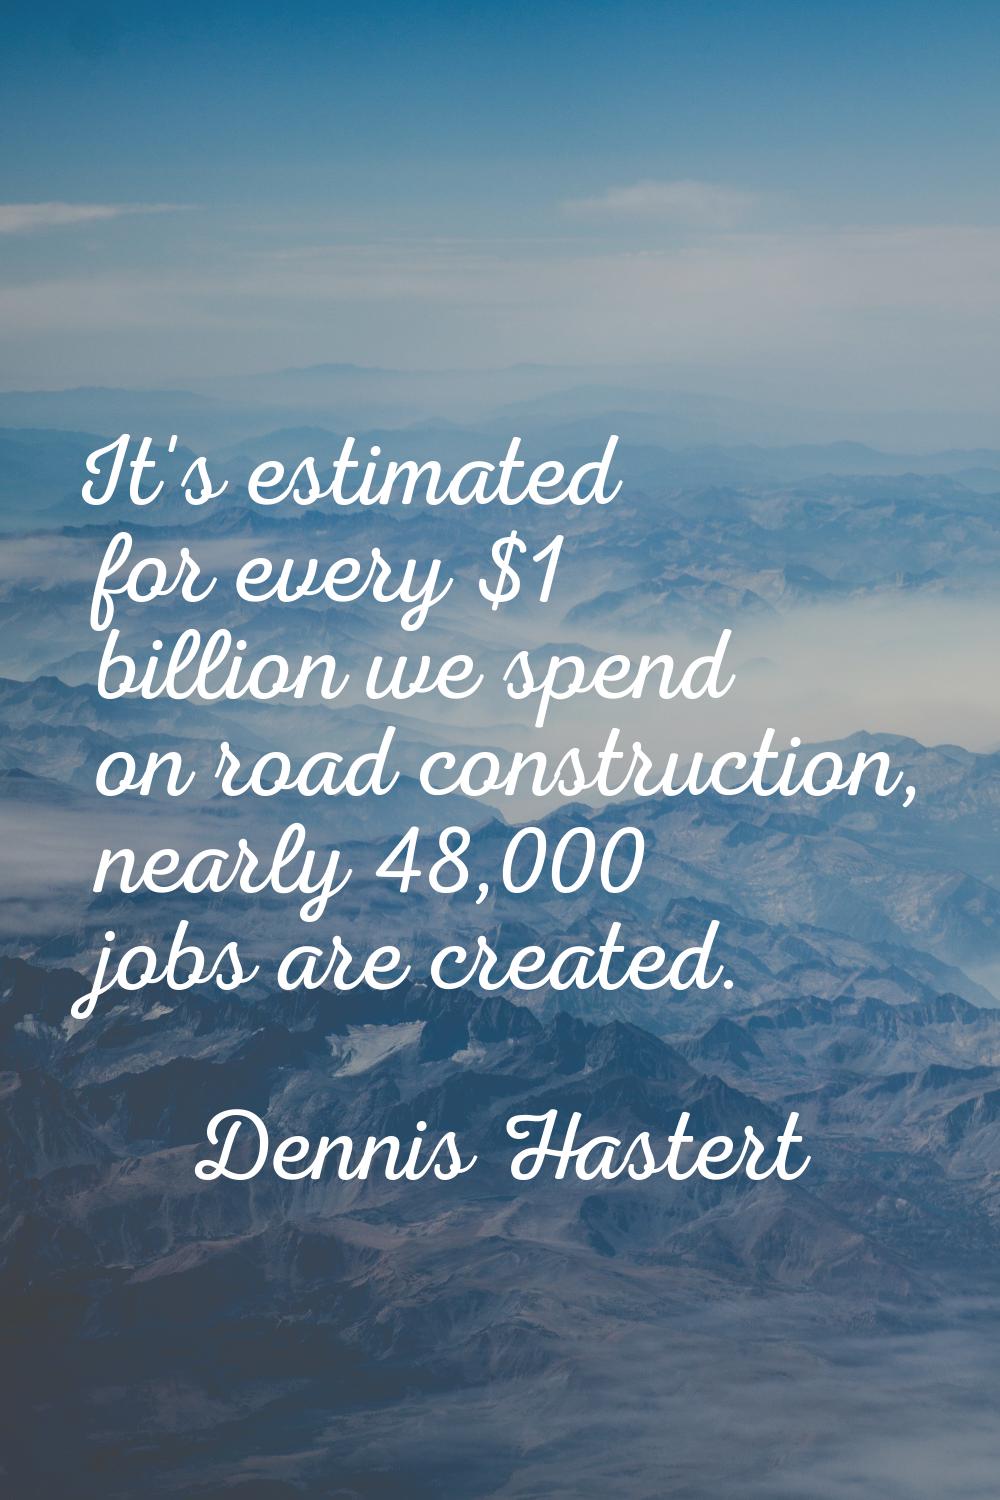 It's estimated for every $1 billion we spend on road construction, nearly 48,000 jobs are created.